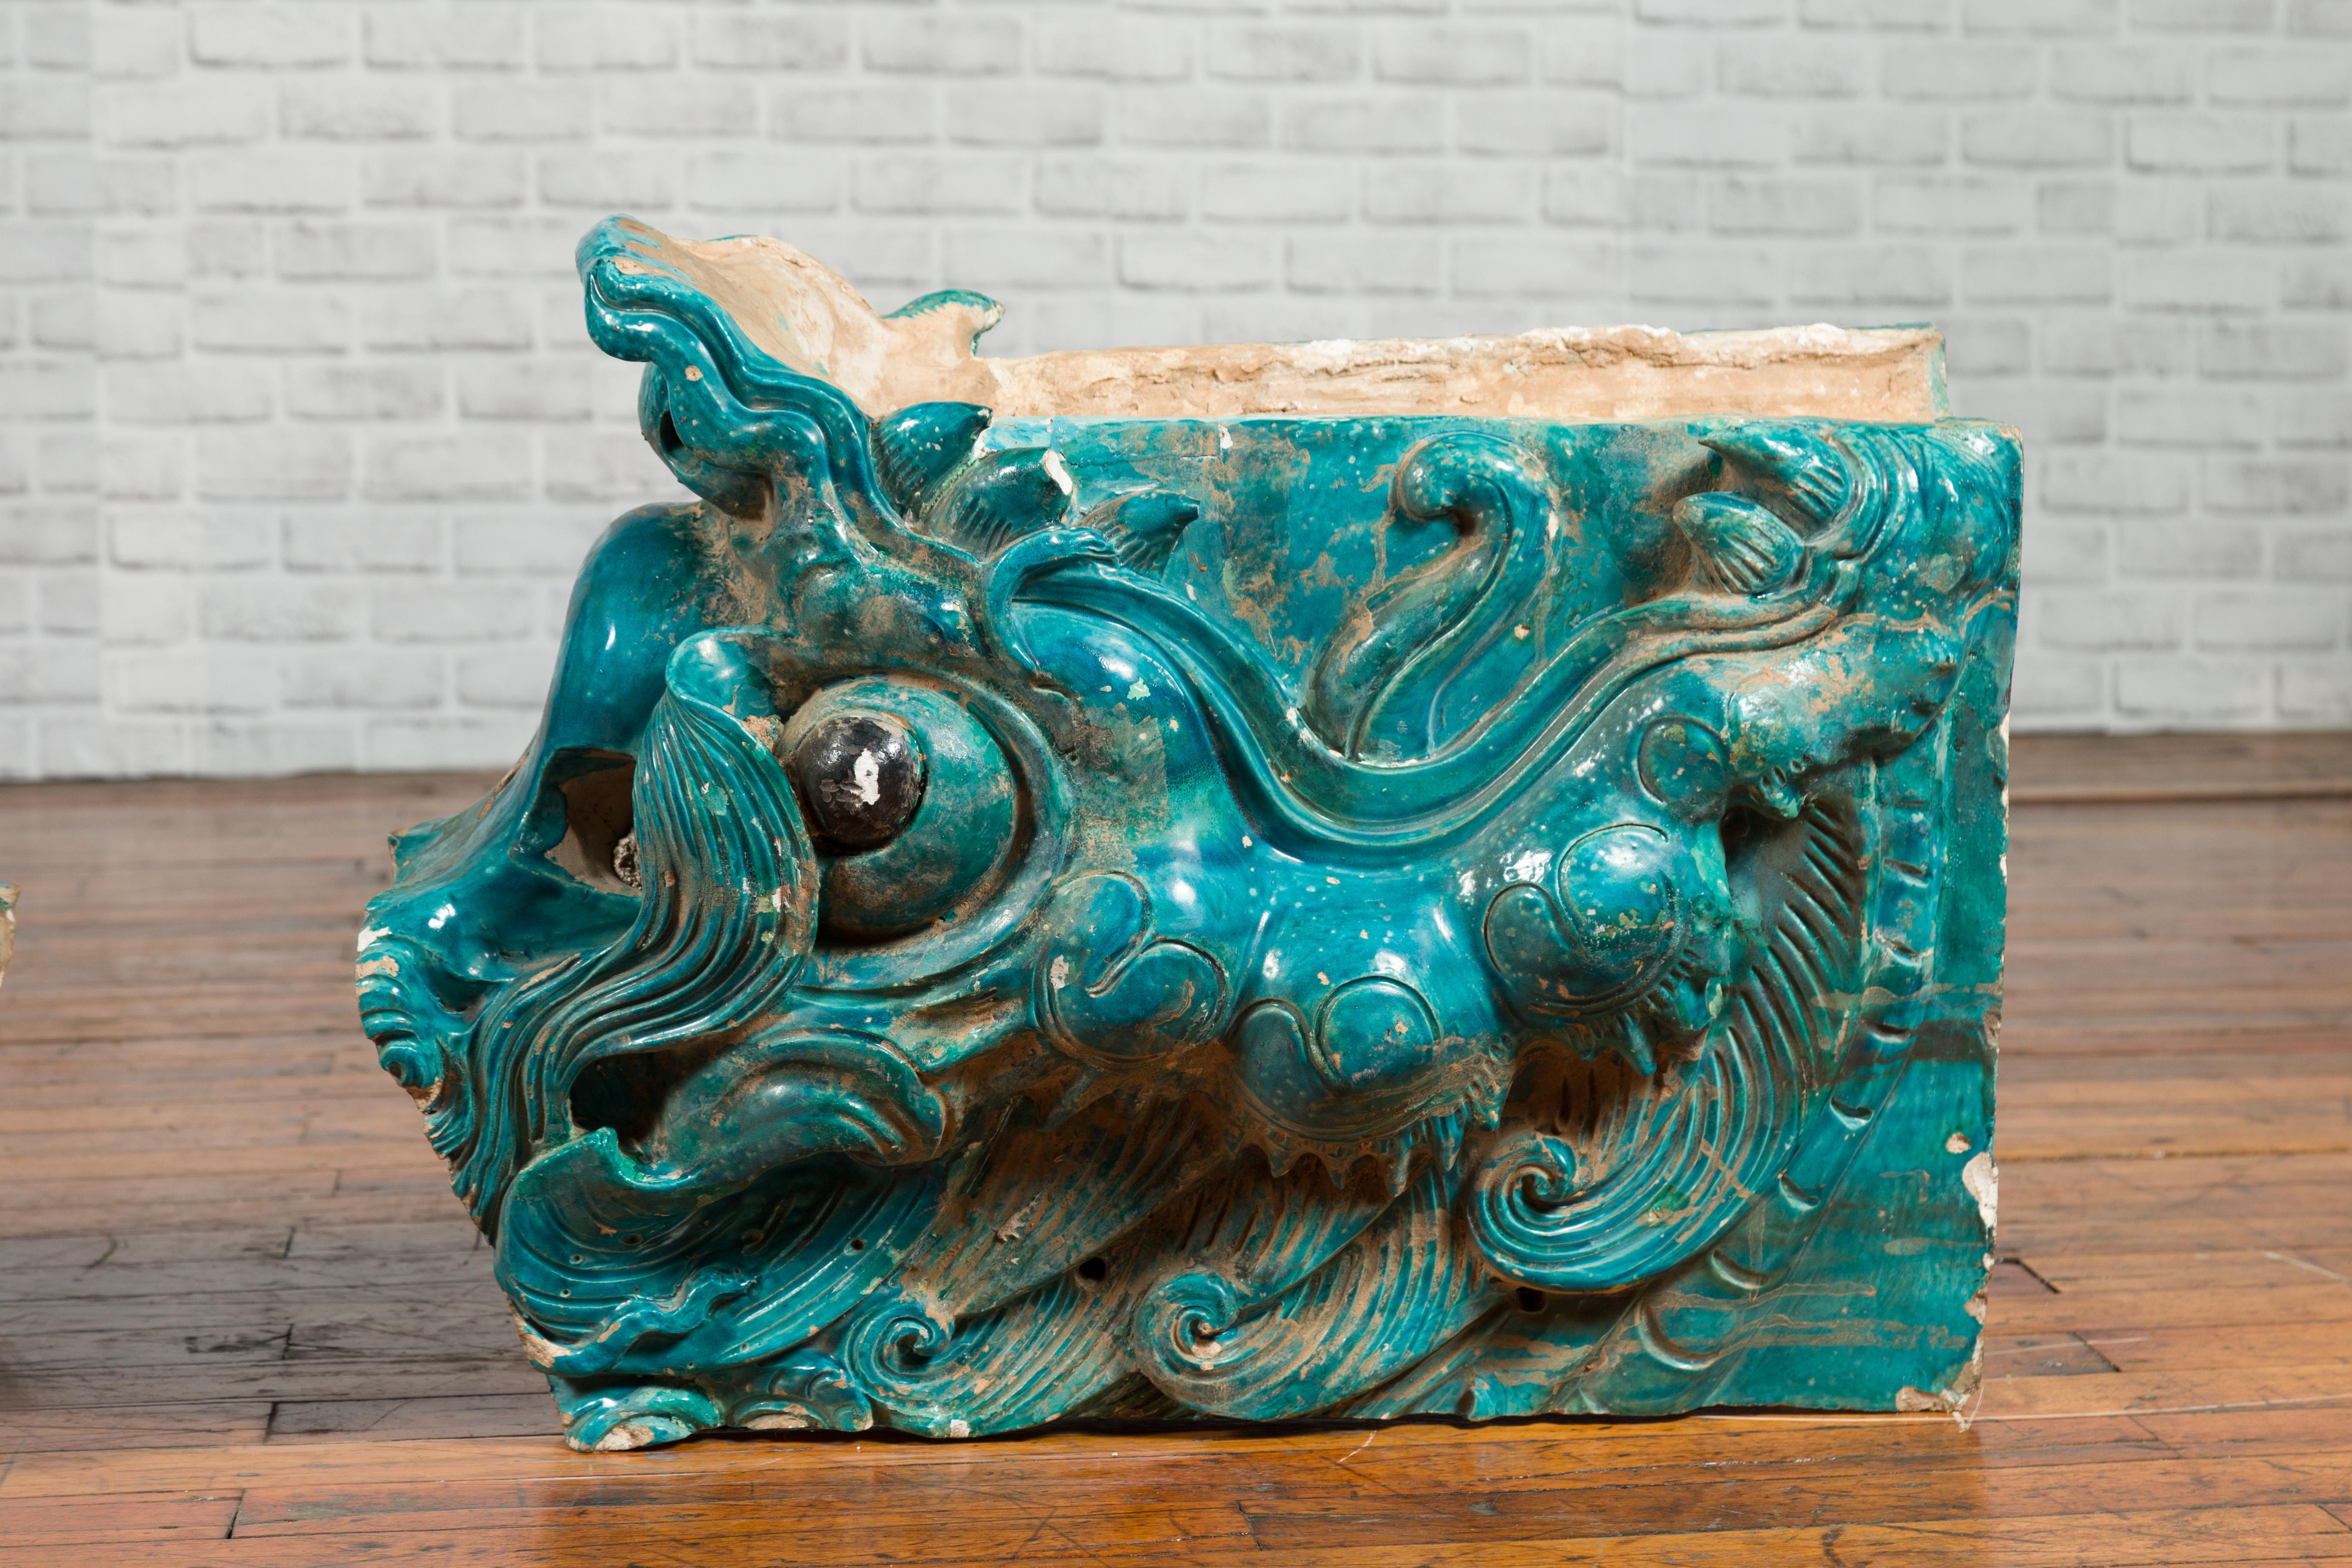 Ceramic Pair of Ming Turquoise Glazed Temple Dragons from the 15th or 16th Century